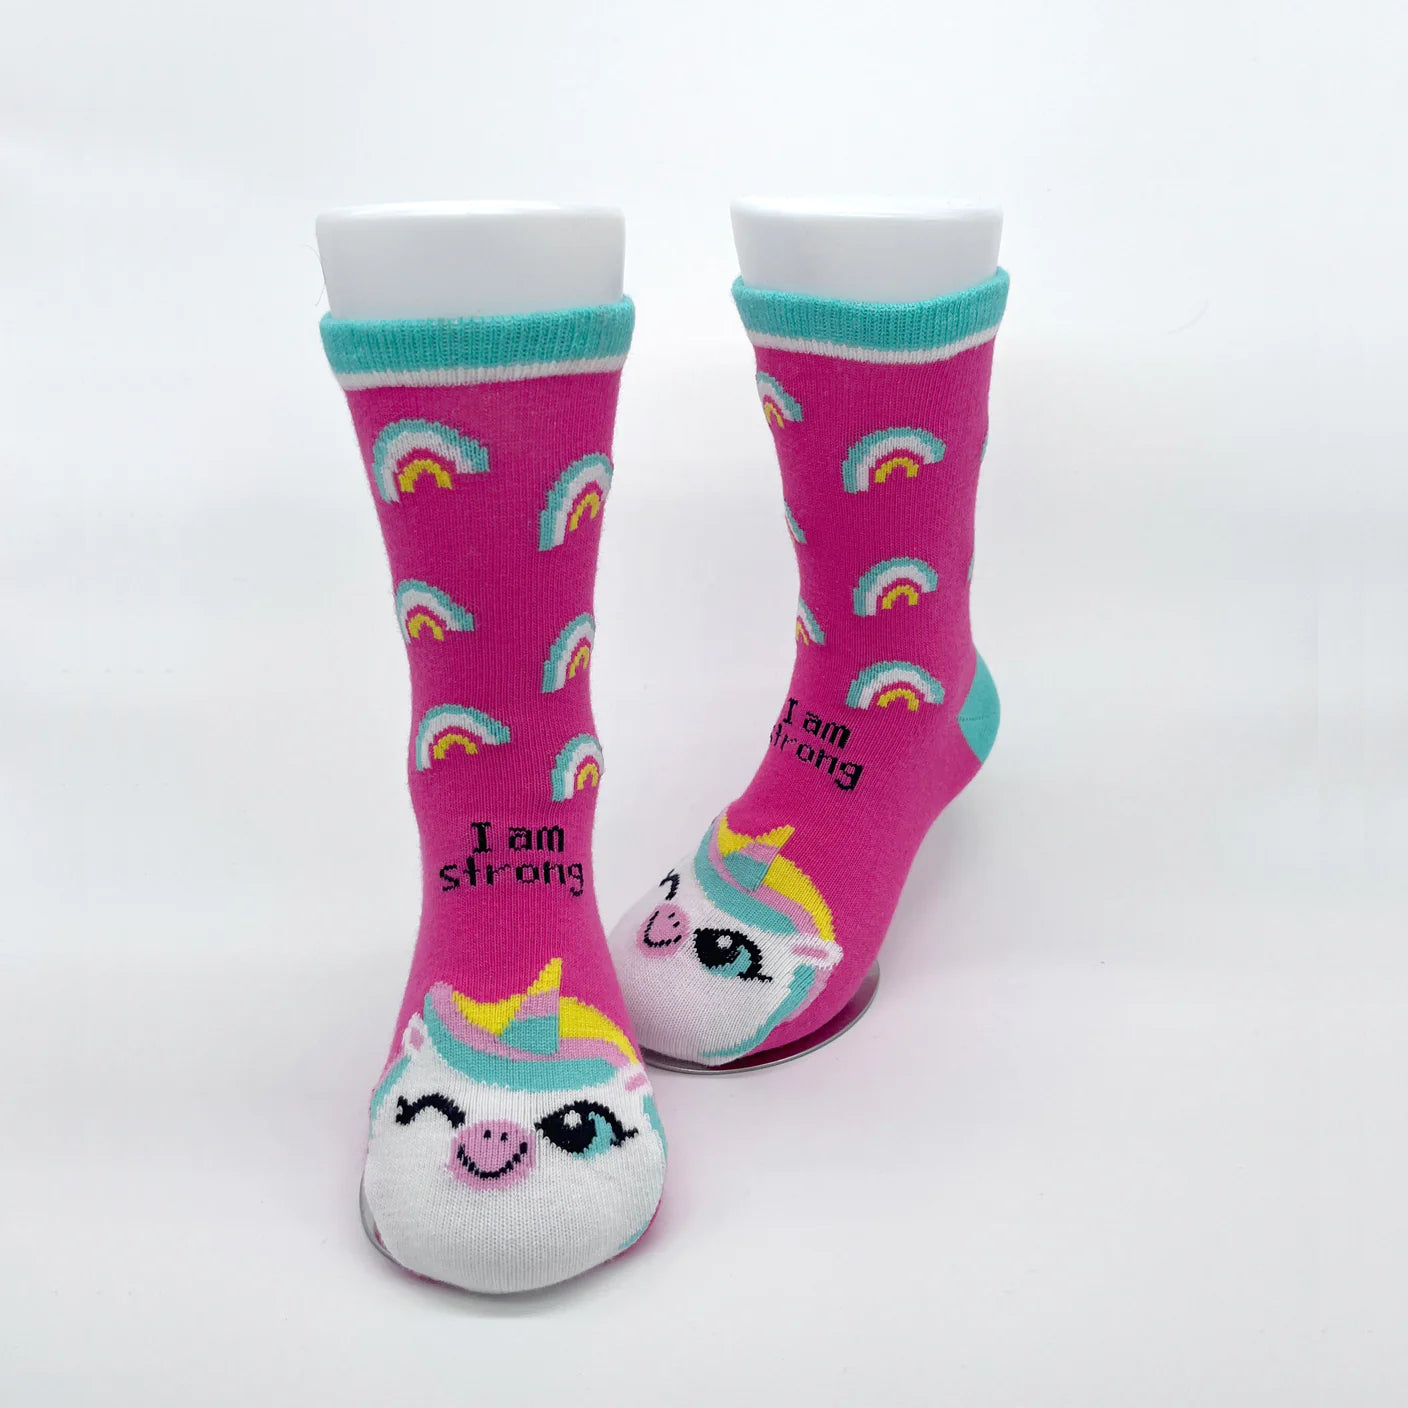 Chaussettes - Unicorn - I am strong!    - Suyon Collection - Chaussettes - 